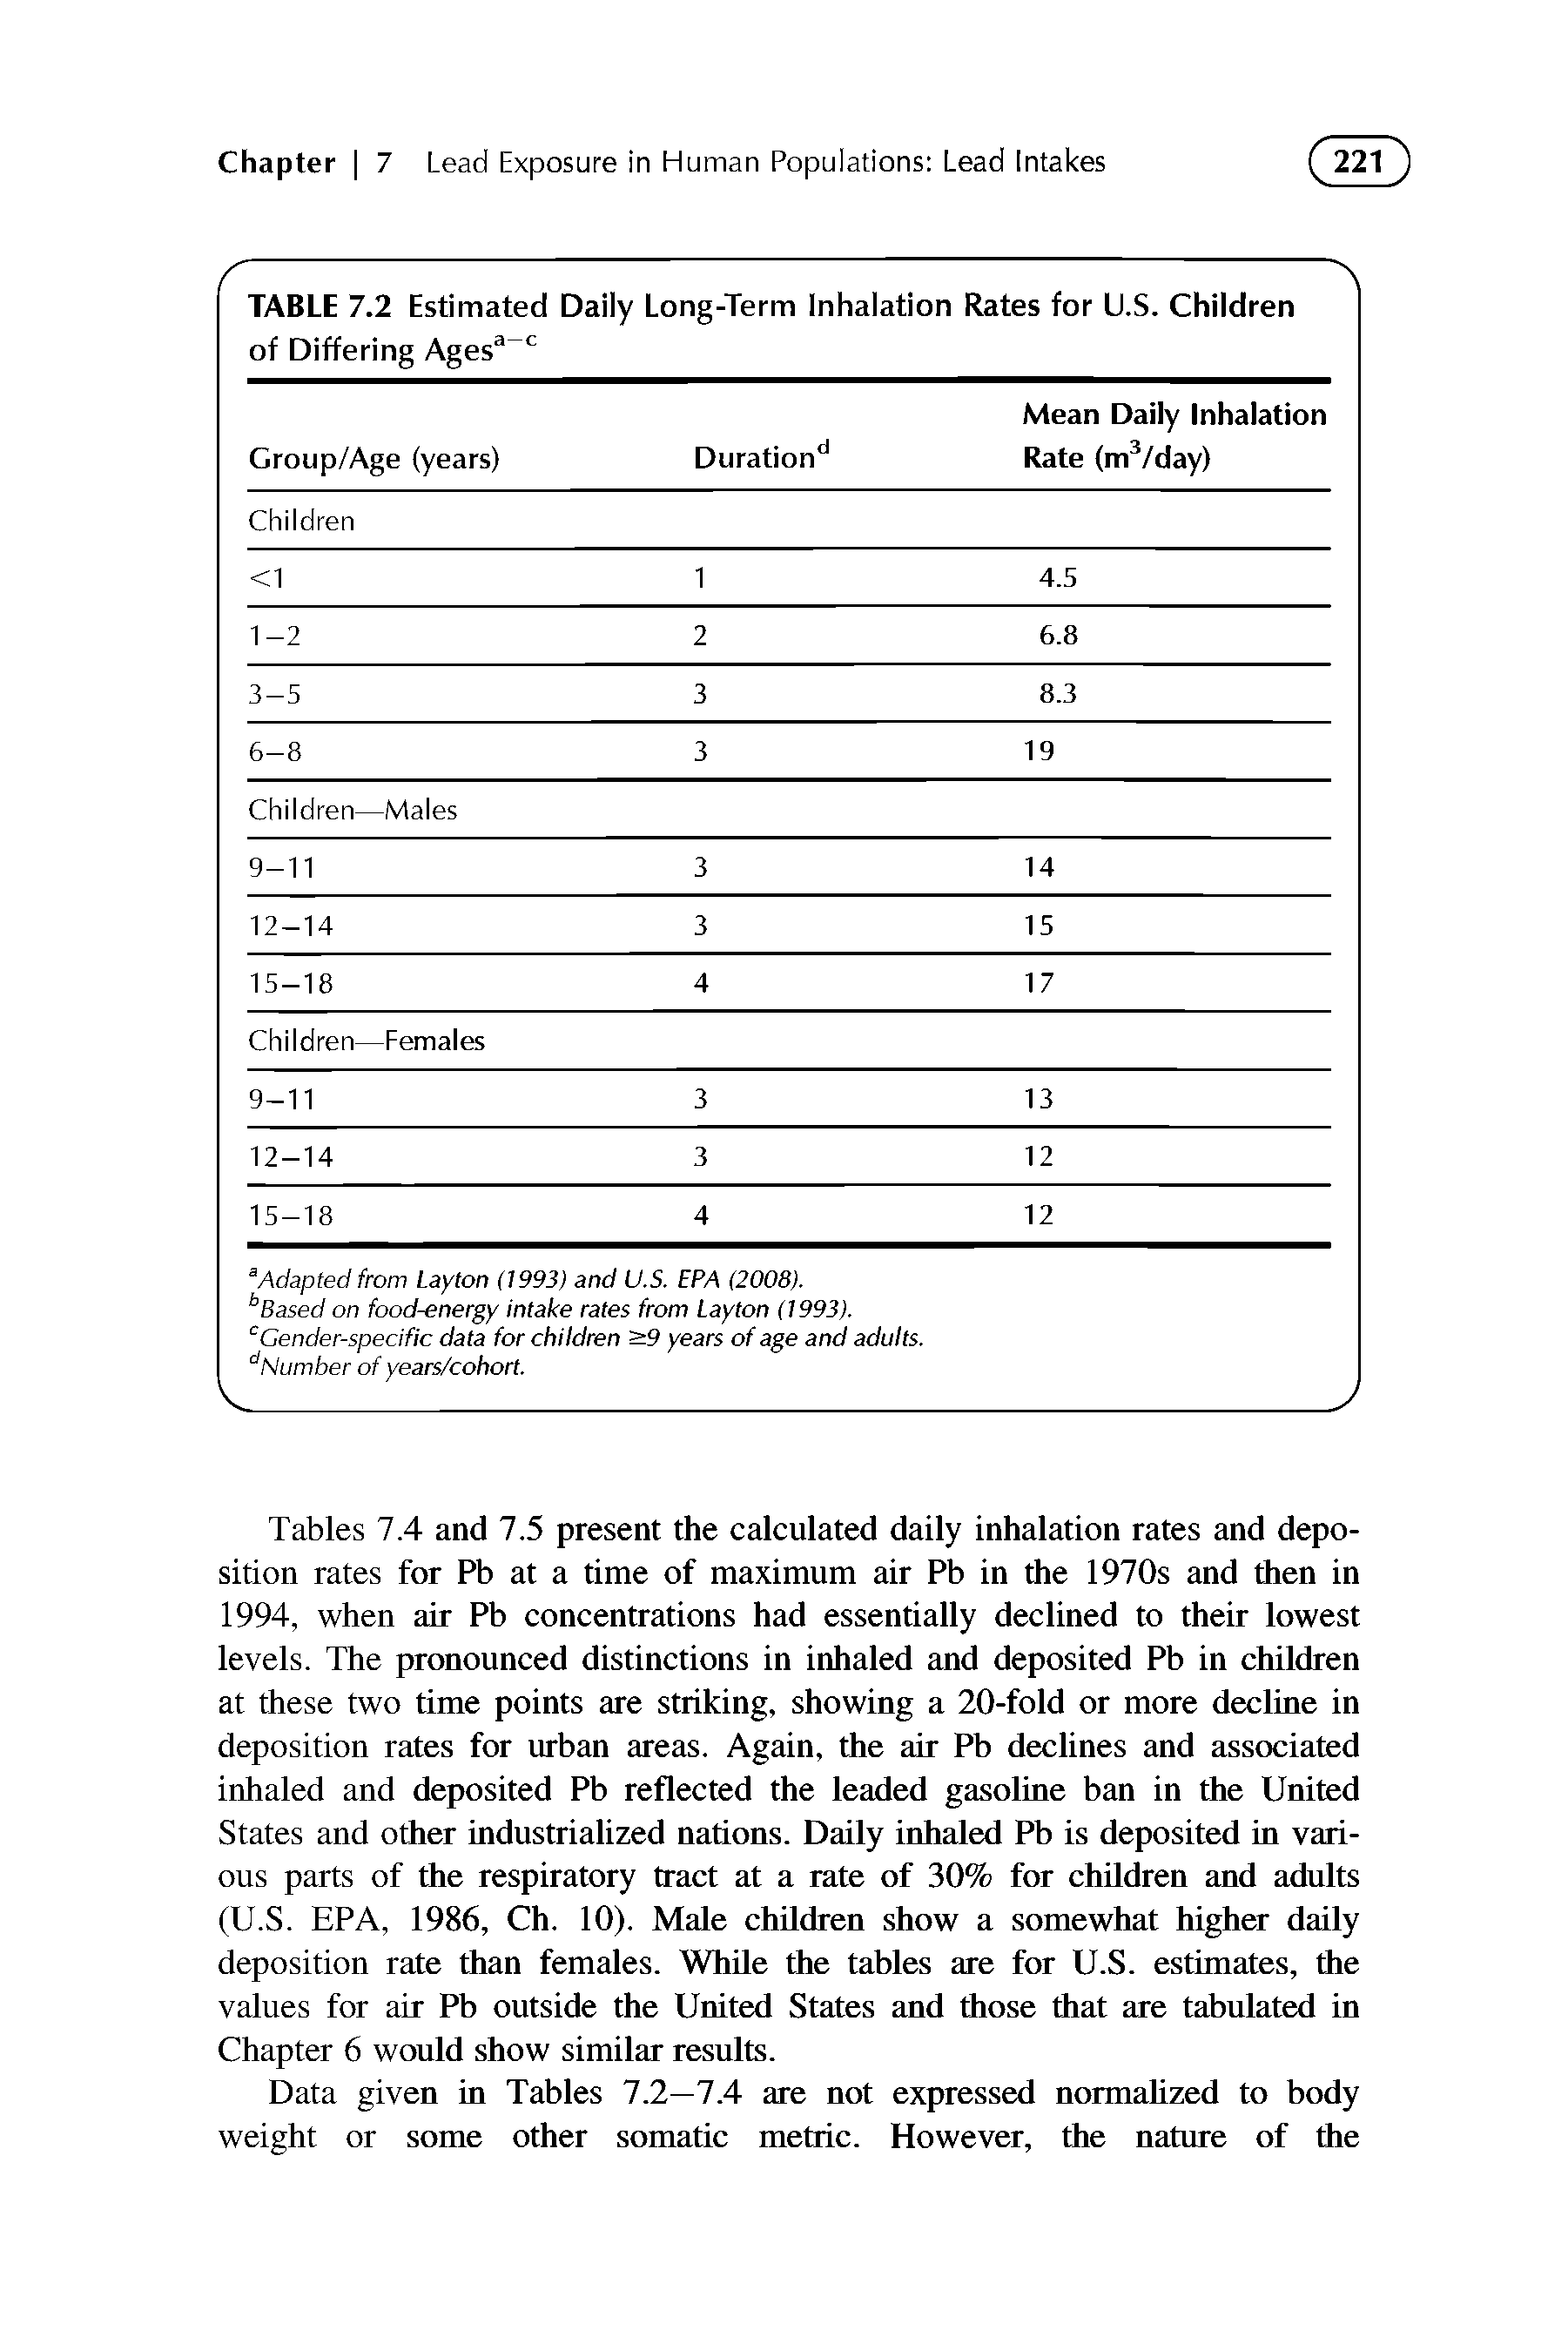 Tables 7.4 and 7.5 present the calculated daily inhalation rates and deposition rates for Pb at a time of maximum air Pb in the 1970s and then in 1994, when air Pb concentrations had essentially declined to their lowest levels. The pronounced distinctions in inhaled and deposited Pb in children at these two time points are striking, showing a 20-fold or more decline in deposition rates for urban areas. Again, the air Pb declines and associated inhaled and deposited Pb reflected the leaded gasoline ban in the United States and other industrialized nations. Daily inhaled Pb is deposited in various parts of the respiratory tract at a rate of 30% for children and adults (U.S. EPA, 1986, Ch. 10). Male children show a somewhat higher daily deposition rate than females. While the tables are for U.S. estimates, the values for air Pb outside the United States and those that are tabulated in Chapter 6 would show similar results.